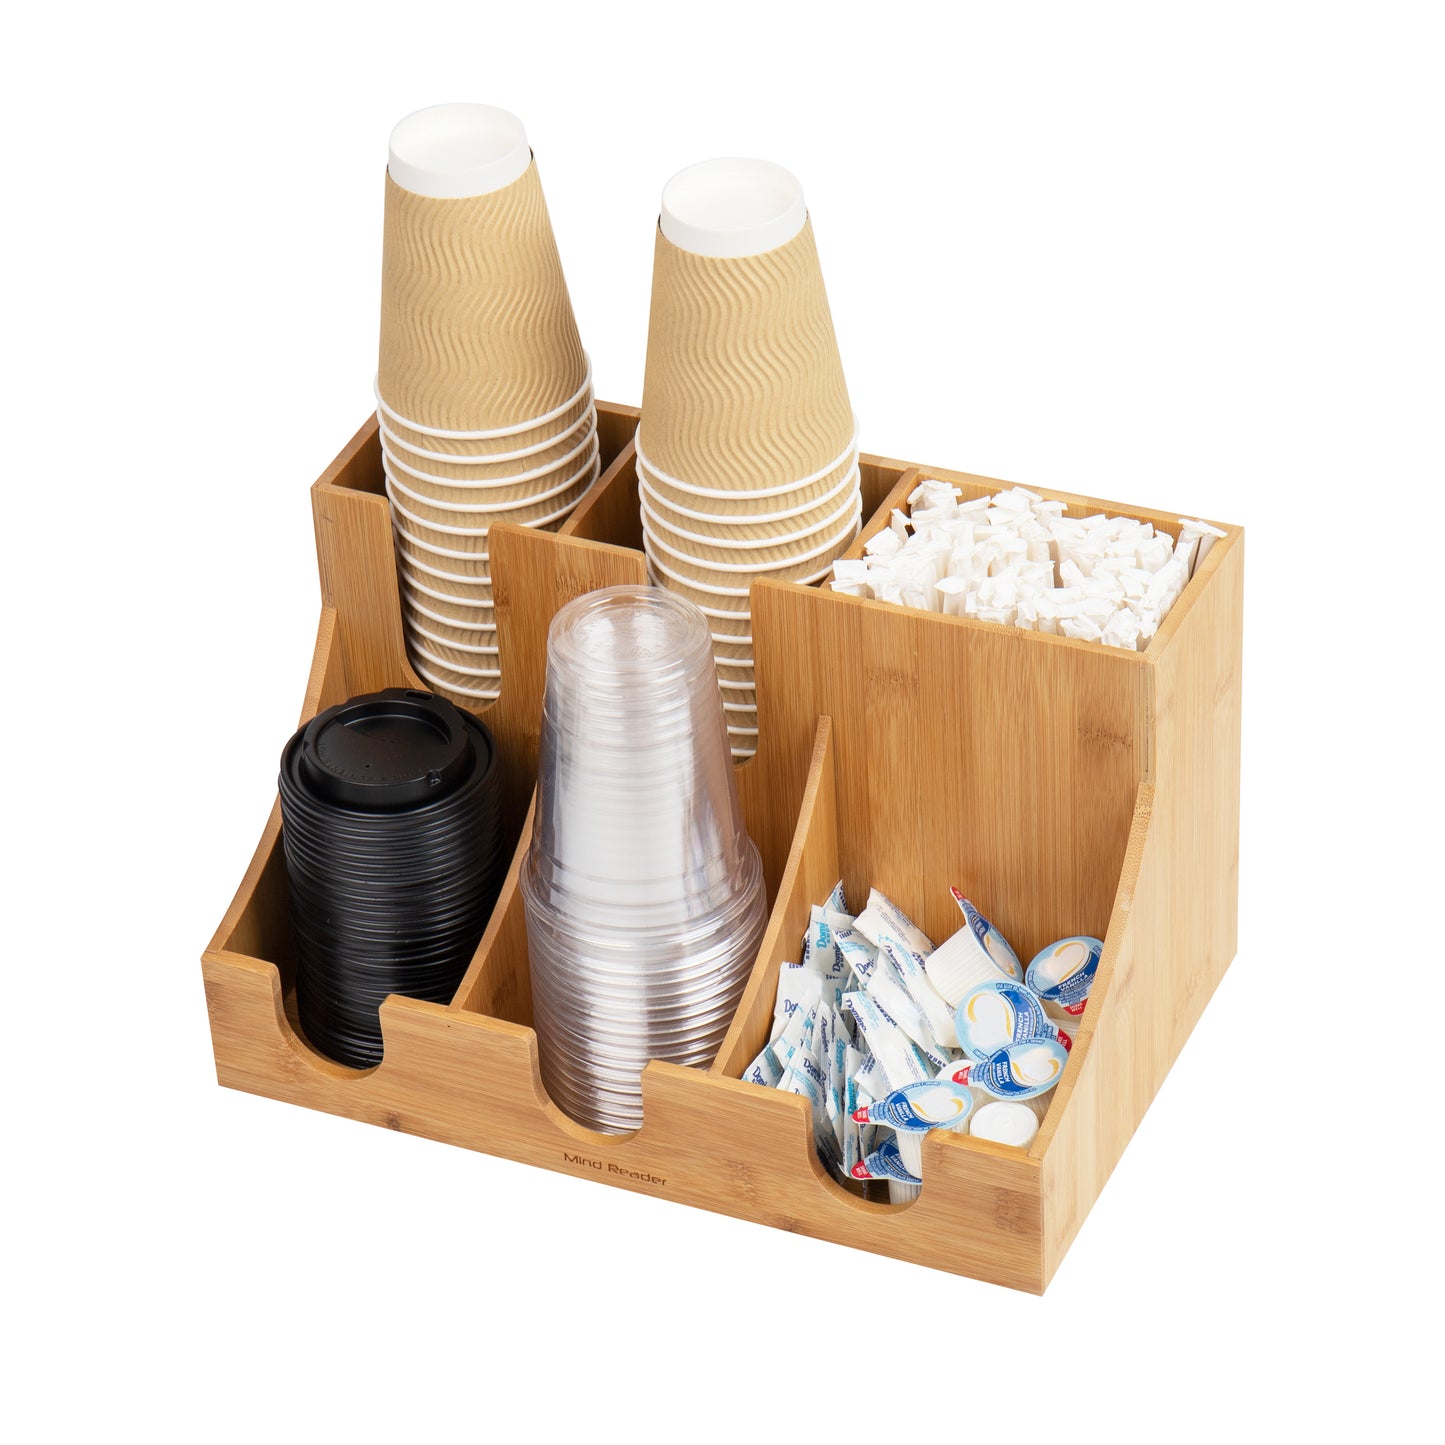 Mind Reader Bali Collection, 6-Compartment Cup, Lid and Condiment Dispenser, Breakroom, Countertop Organizer, Bamboo, Brown